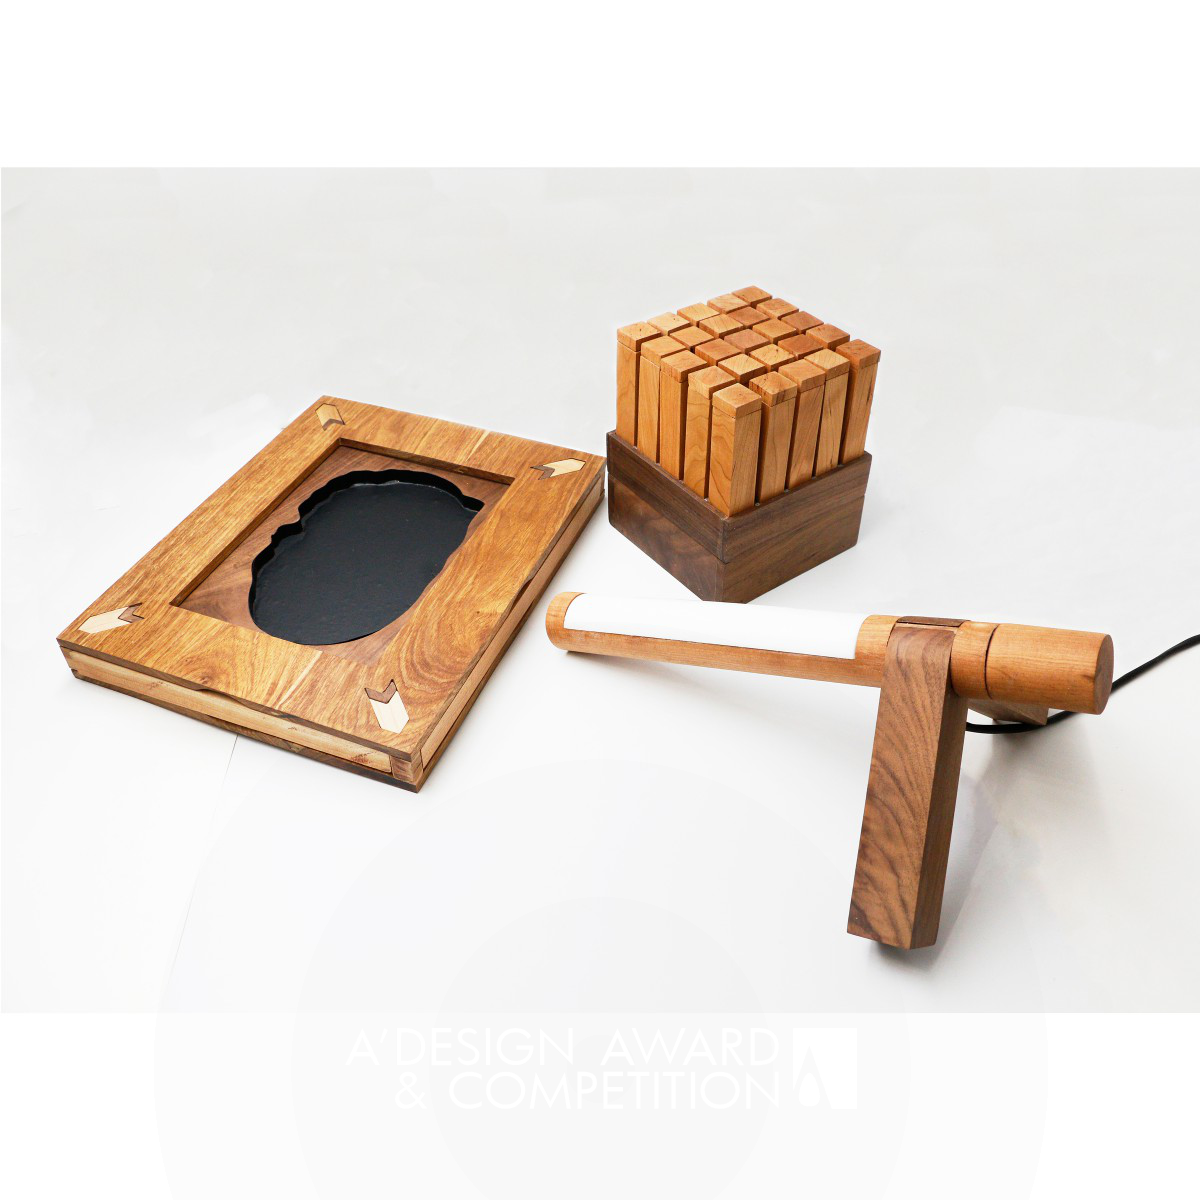 Mortise-tenon joint stationery Adjustable lamp,Storage box,Ink-stone